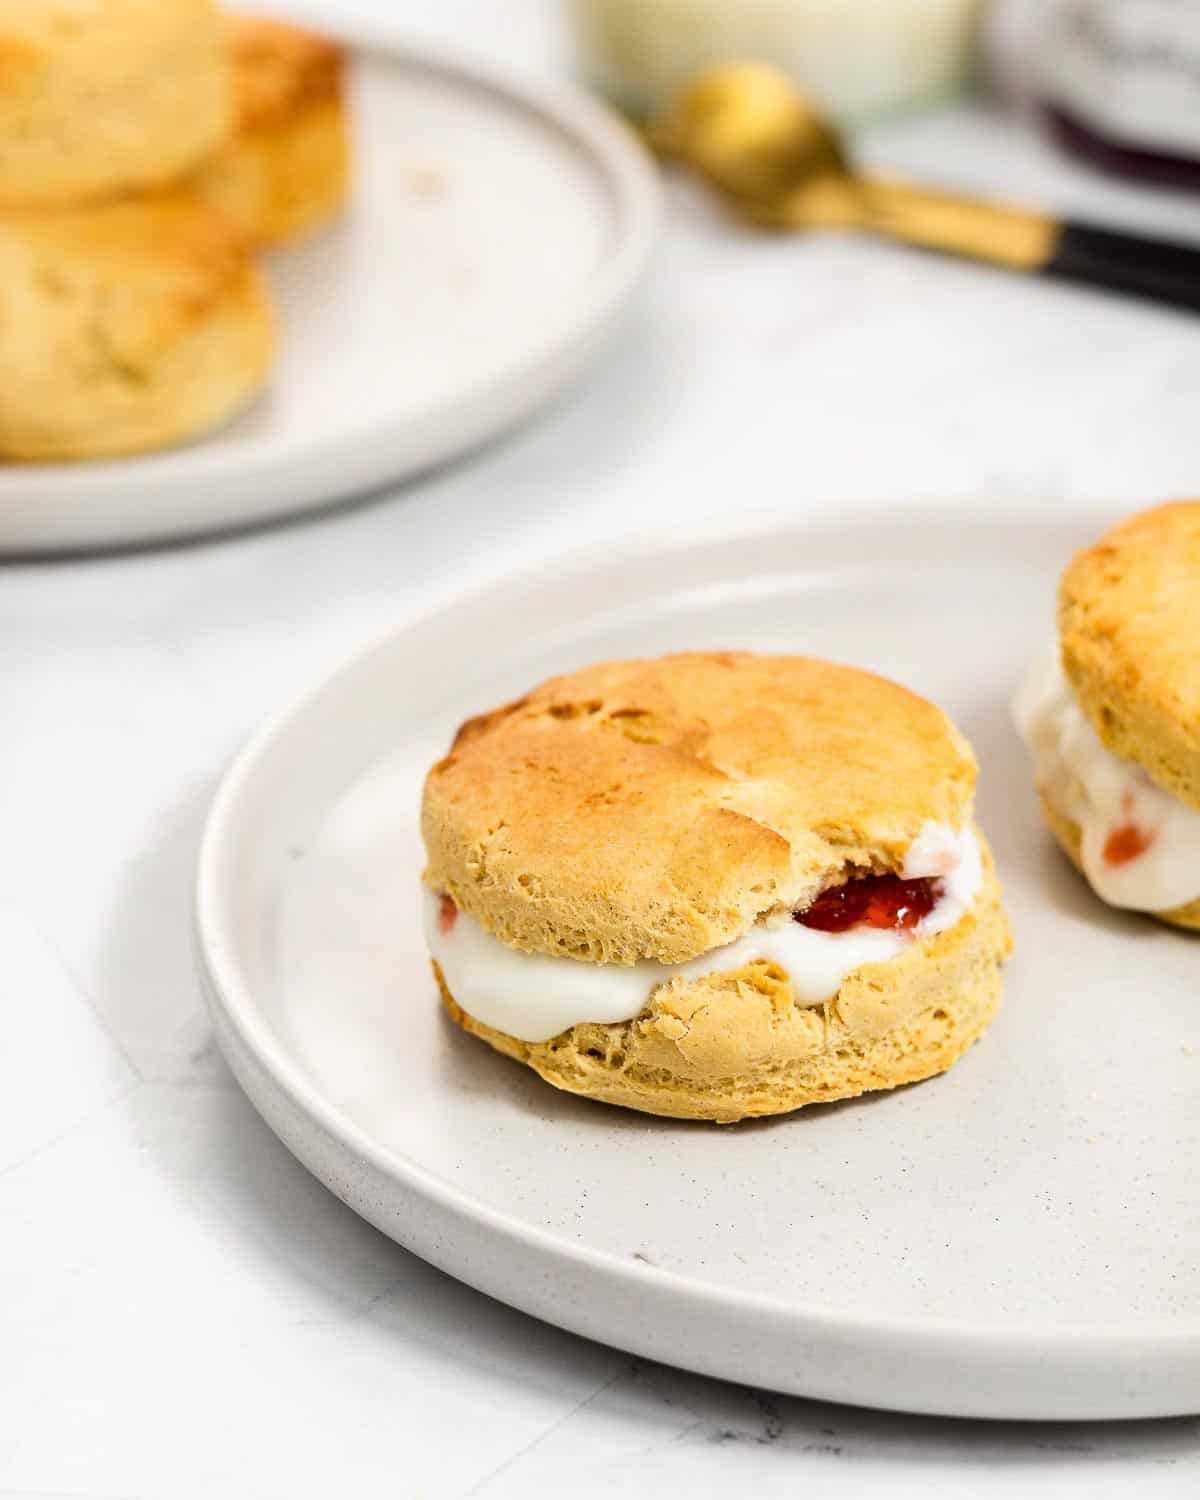 Two scones with yoghurt and jam on a grey plate. In the background there is a plate with some more scones.